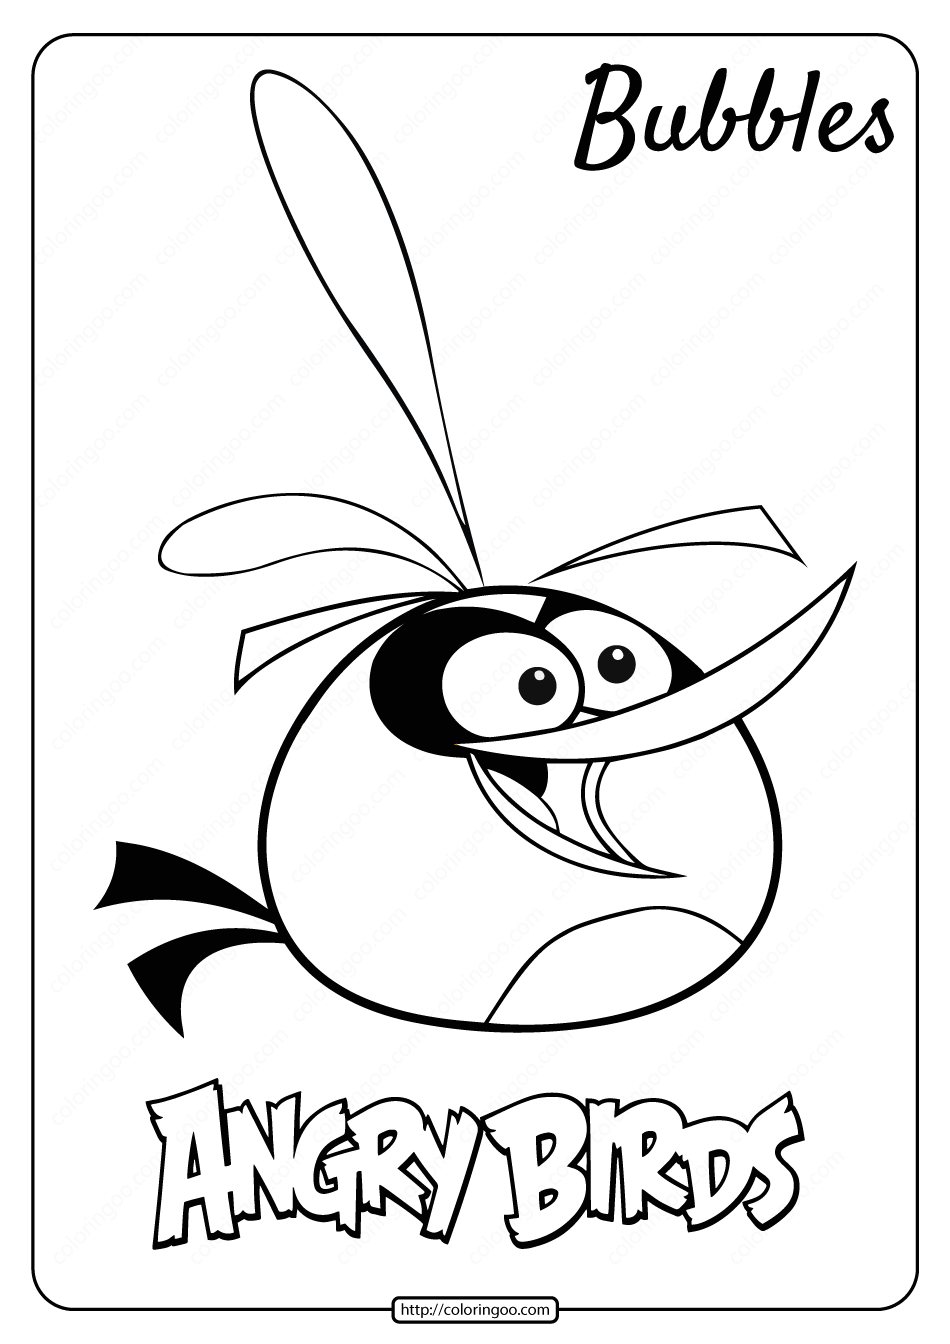 printable angry birds bubbles pdf coloring page